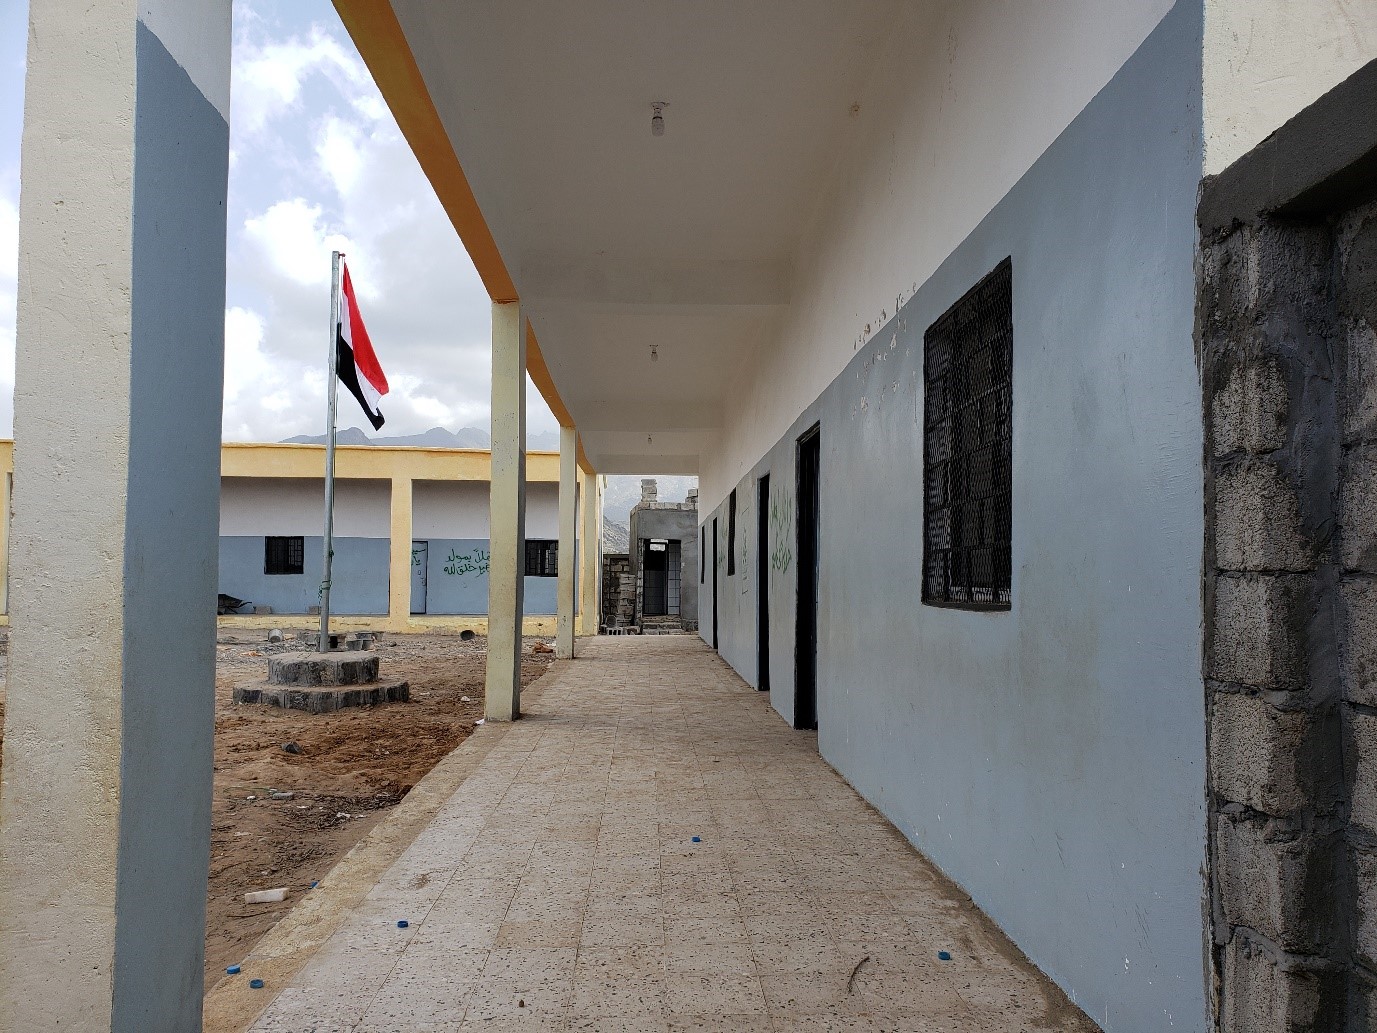 A new building with a flag outside